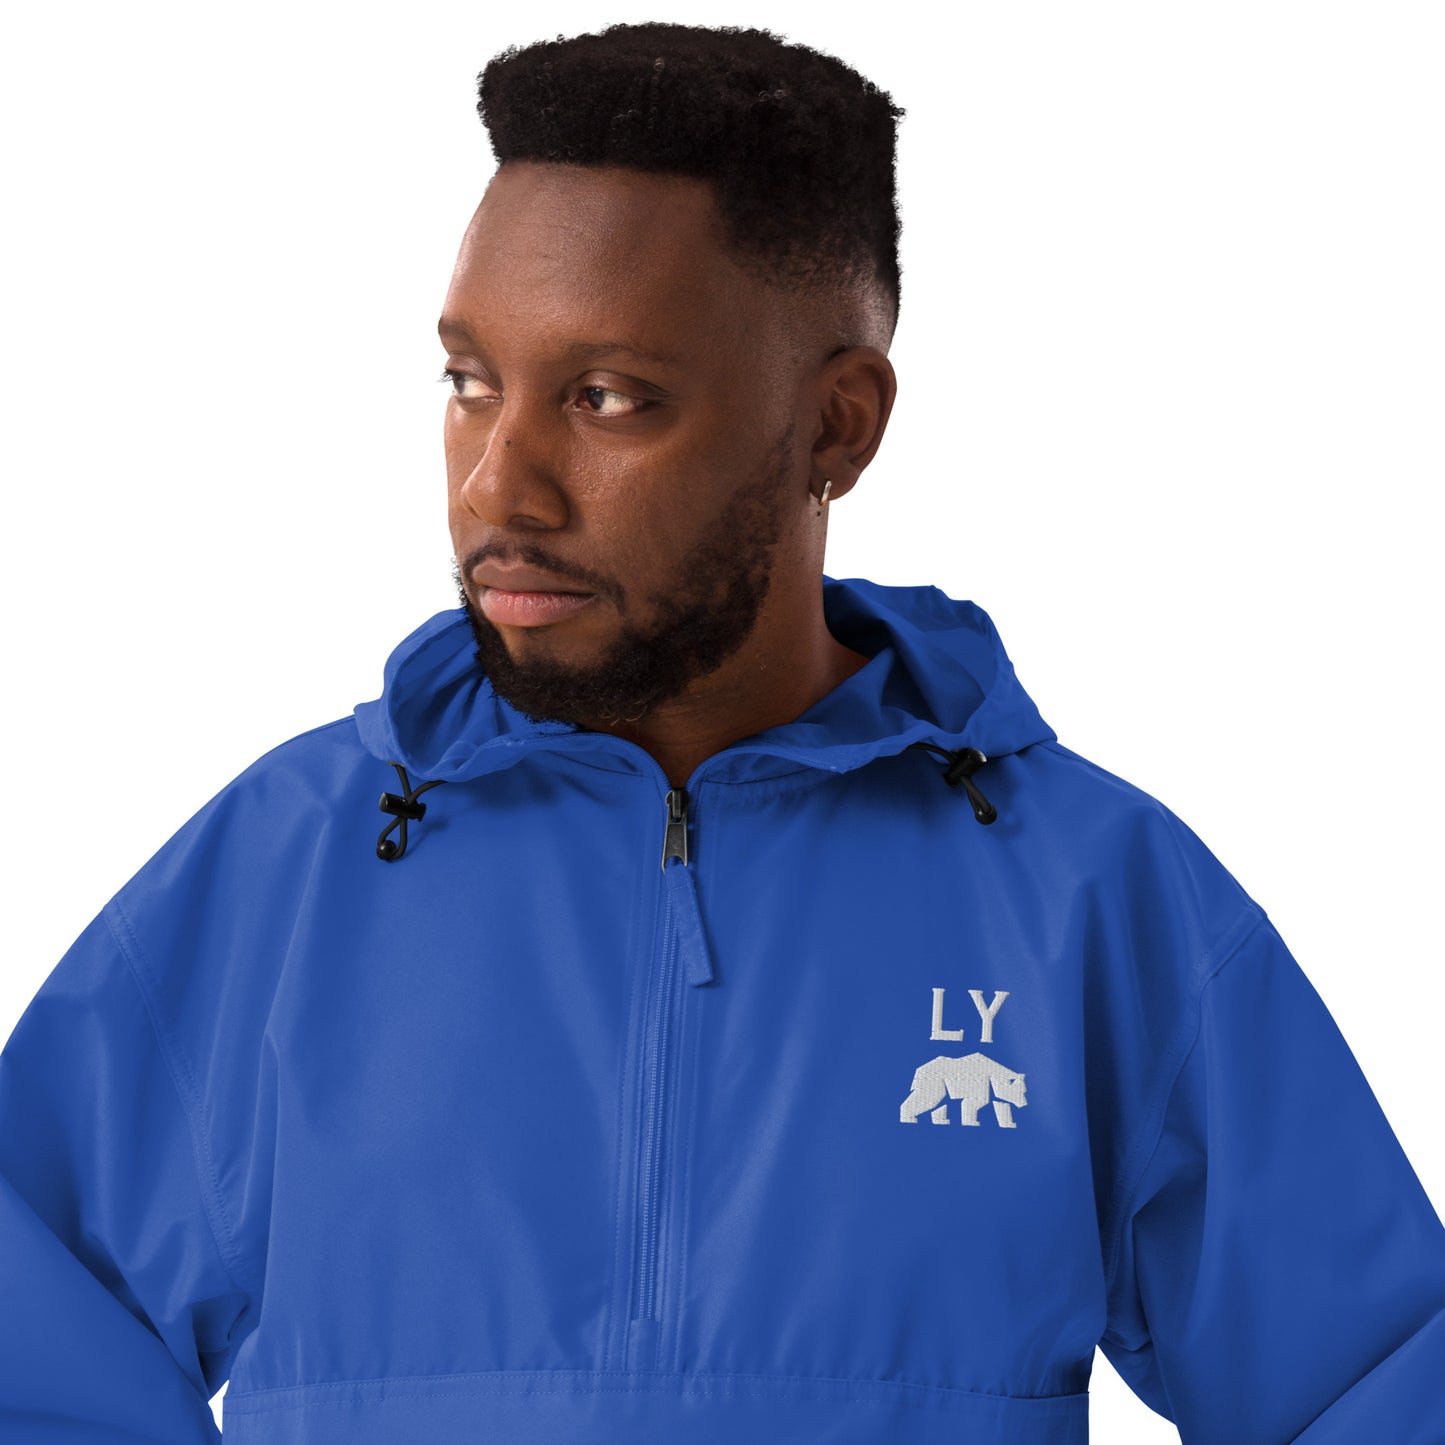 “LY” White on Blue/Navy Adult Champion Packable Jacket